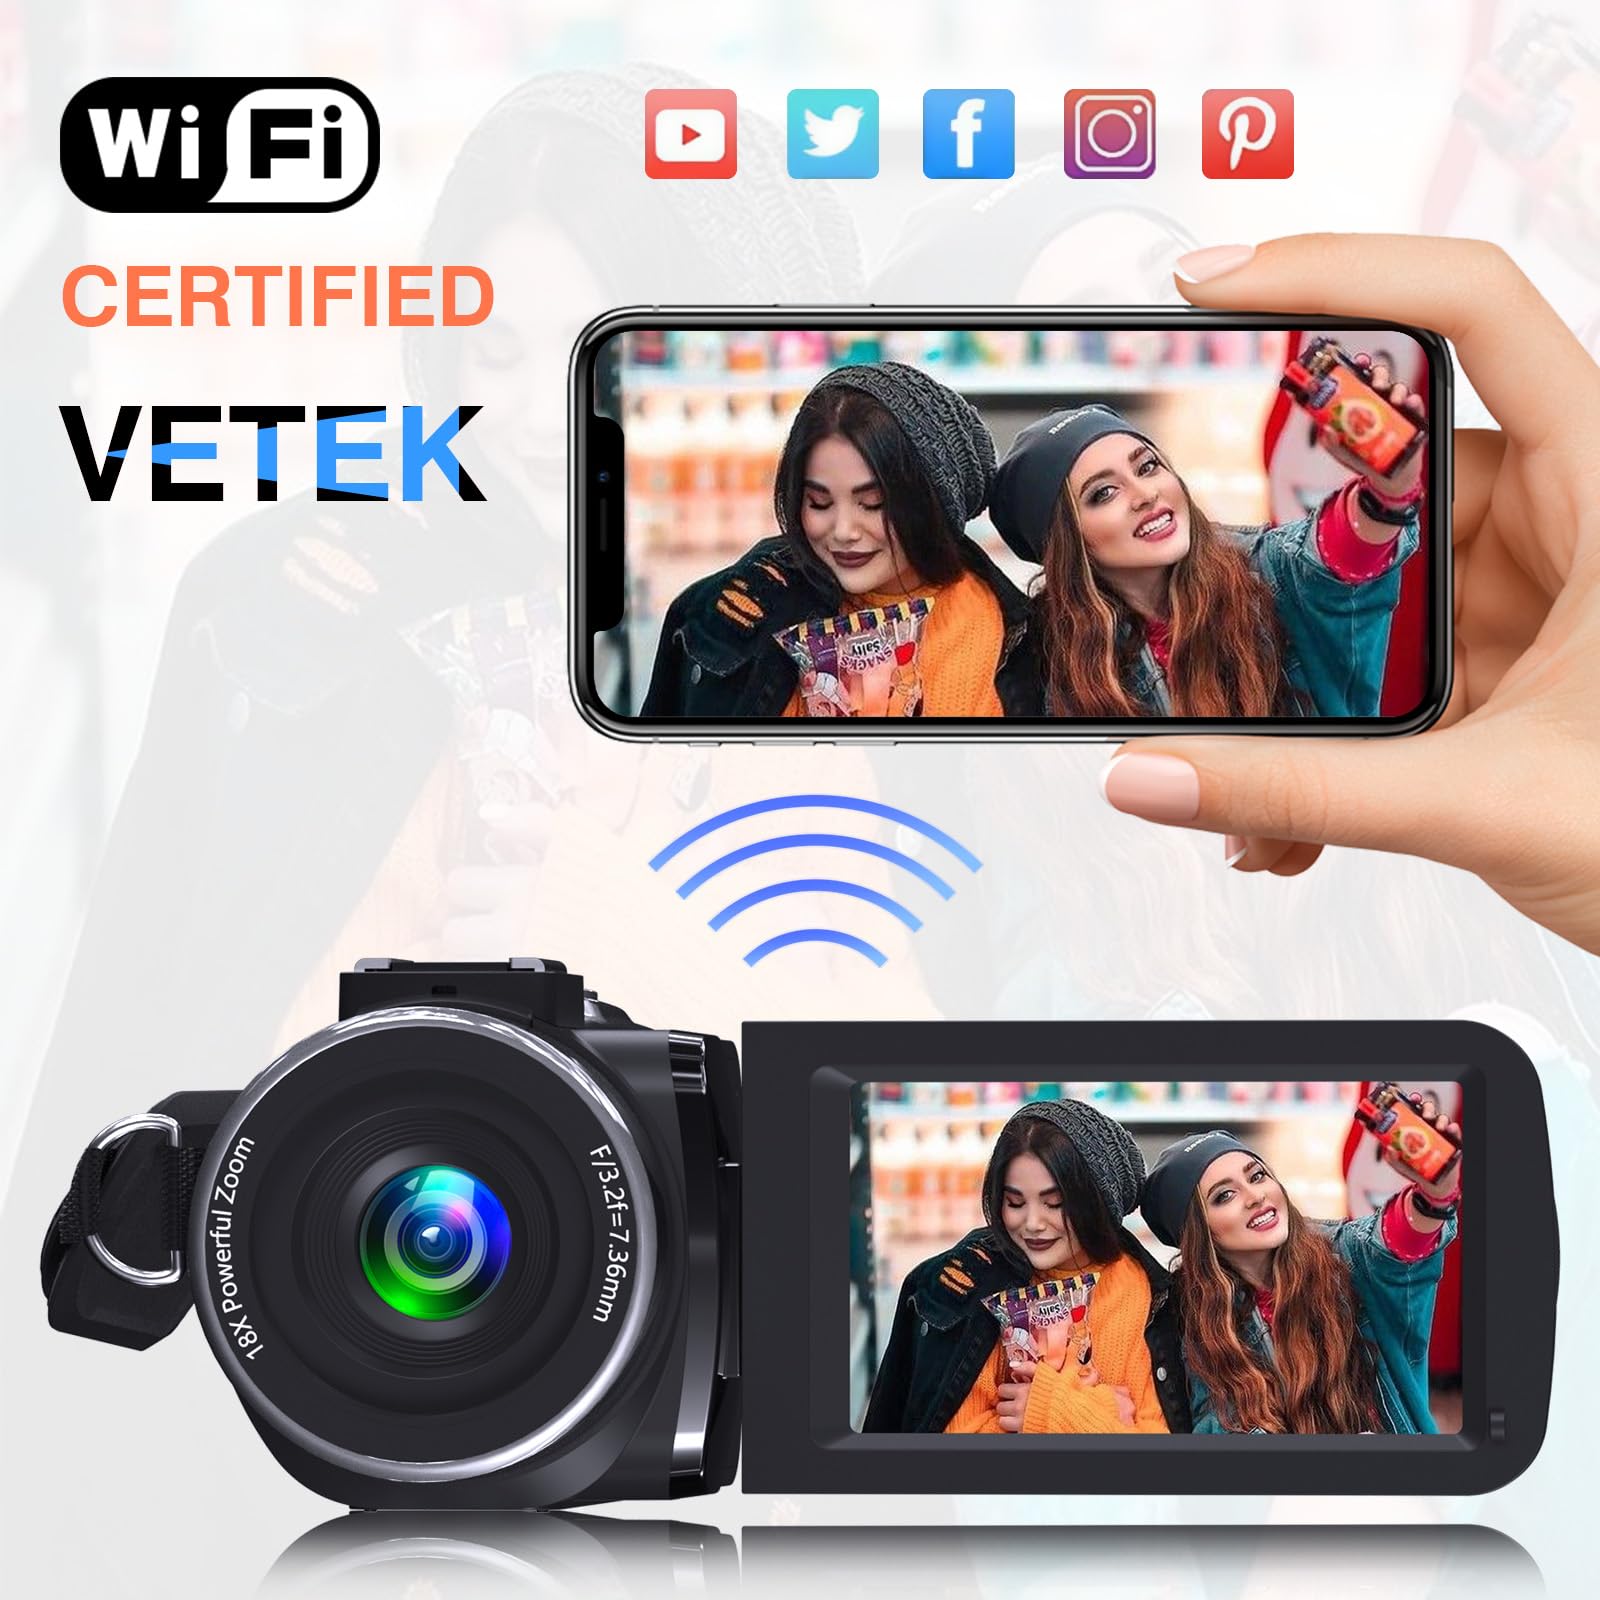 VETEK Video Camera 8k Camcorder 48MP UHD WiFi IR Night Vision Vlogging Camera for YouTube, 18X Digital Zoom 3.0“ LCD Screen Digital Camera with Microphone, 32G SD Card, Remote Control and 2 Batteries